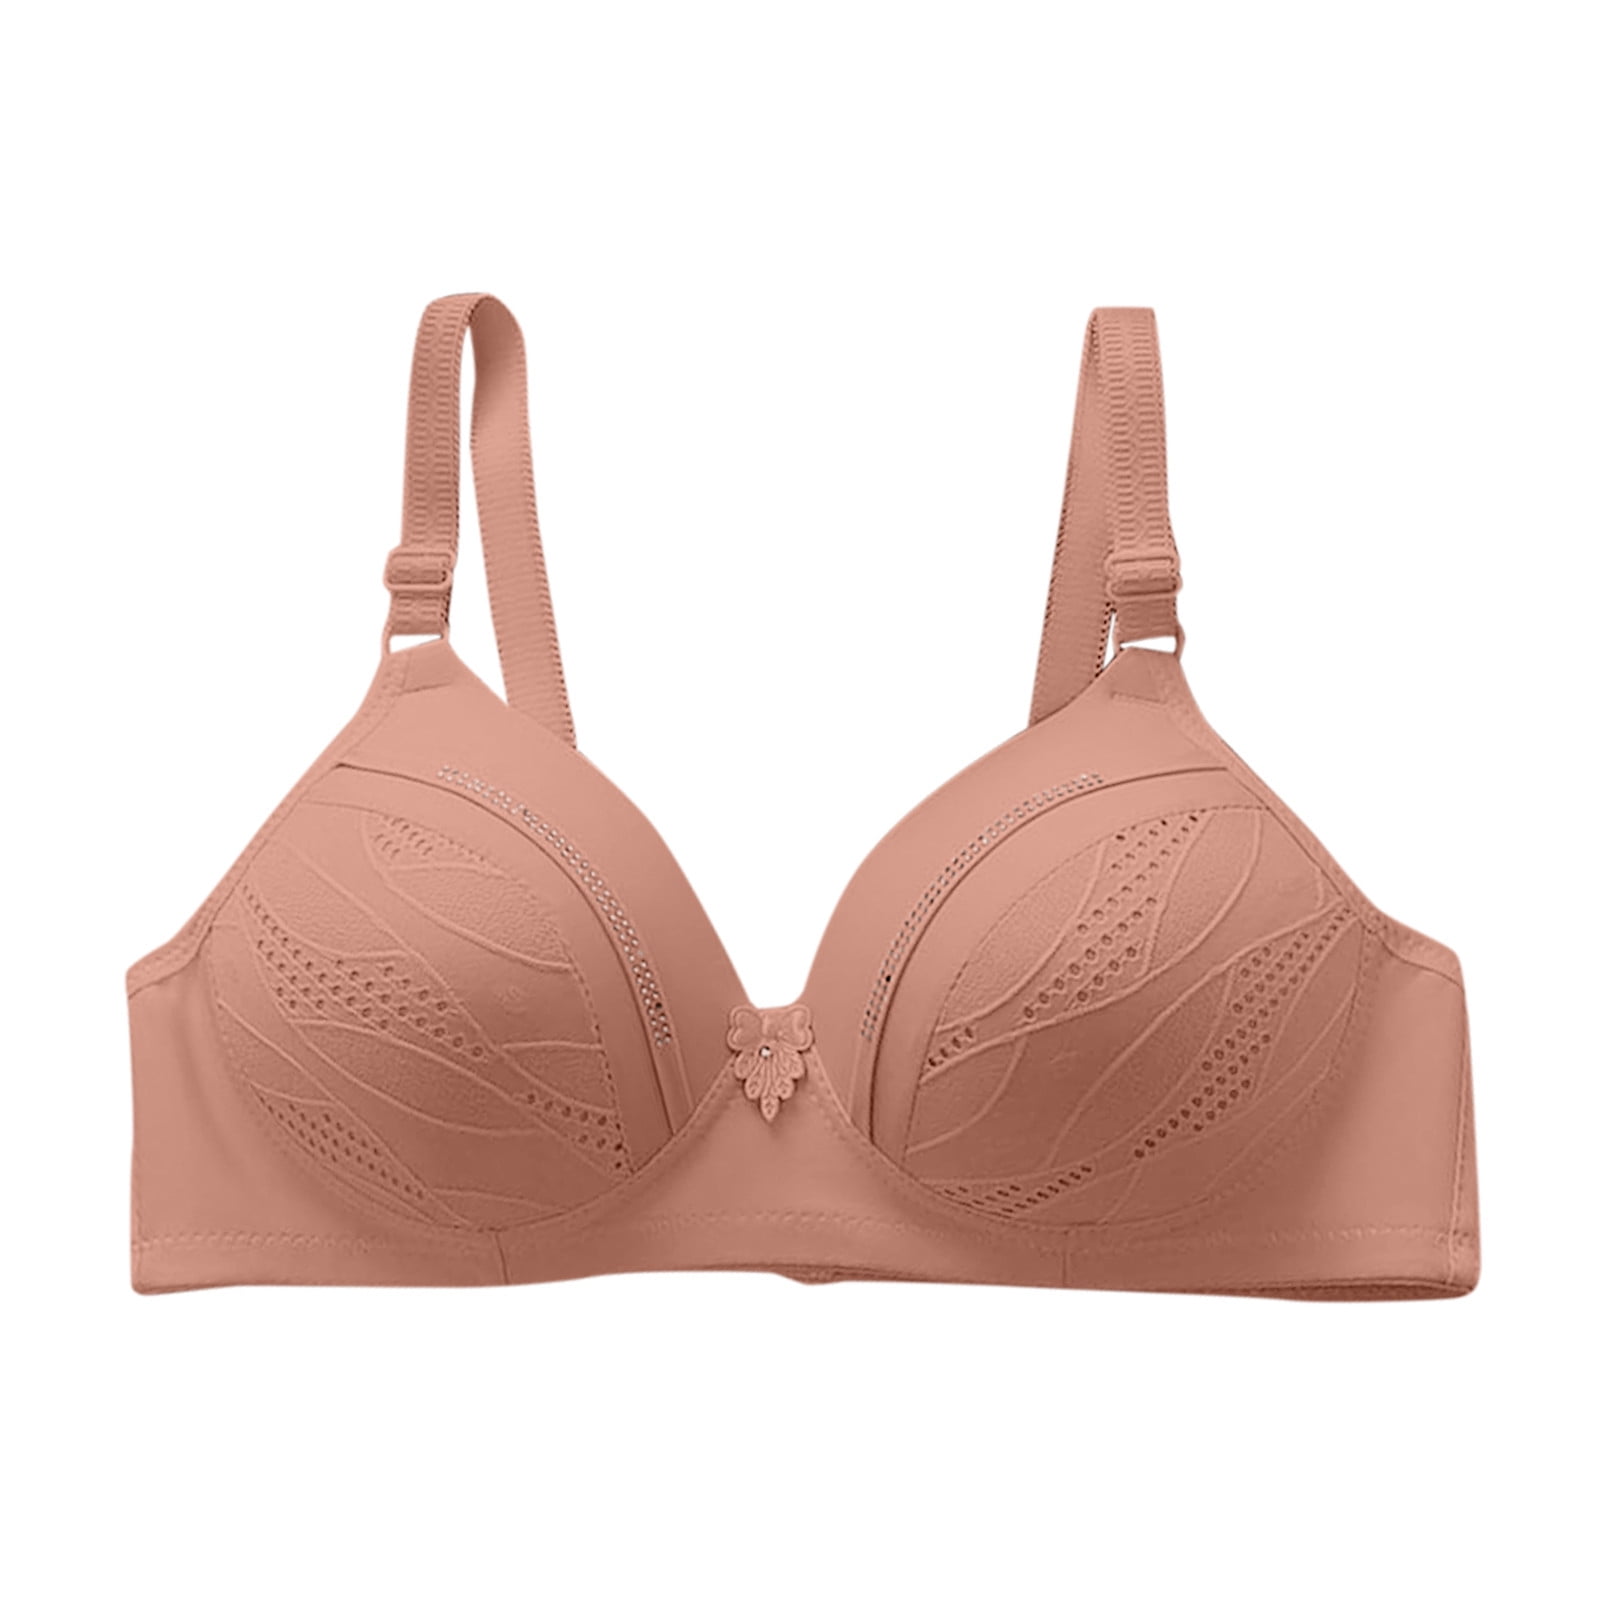 Eashery She Fit Sports Bras Natural Boost Demi Bra, Push-Up Lace T-Shirt  Bra with Convertible Straps, Add-One-Cup-Size Push-Up T-Shirt Bra C 40